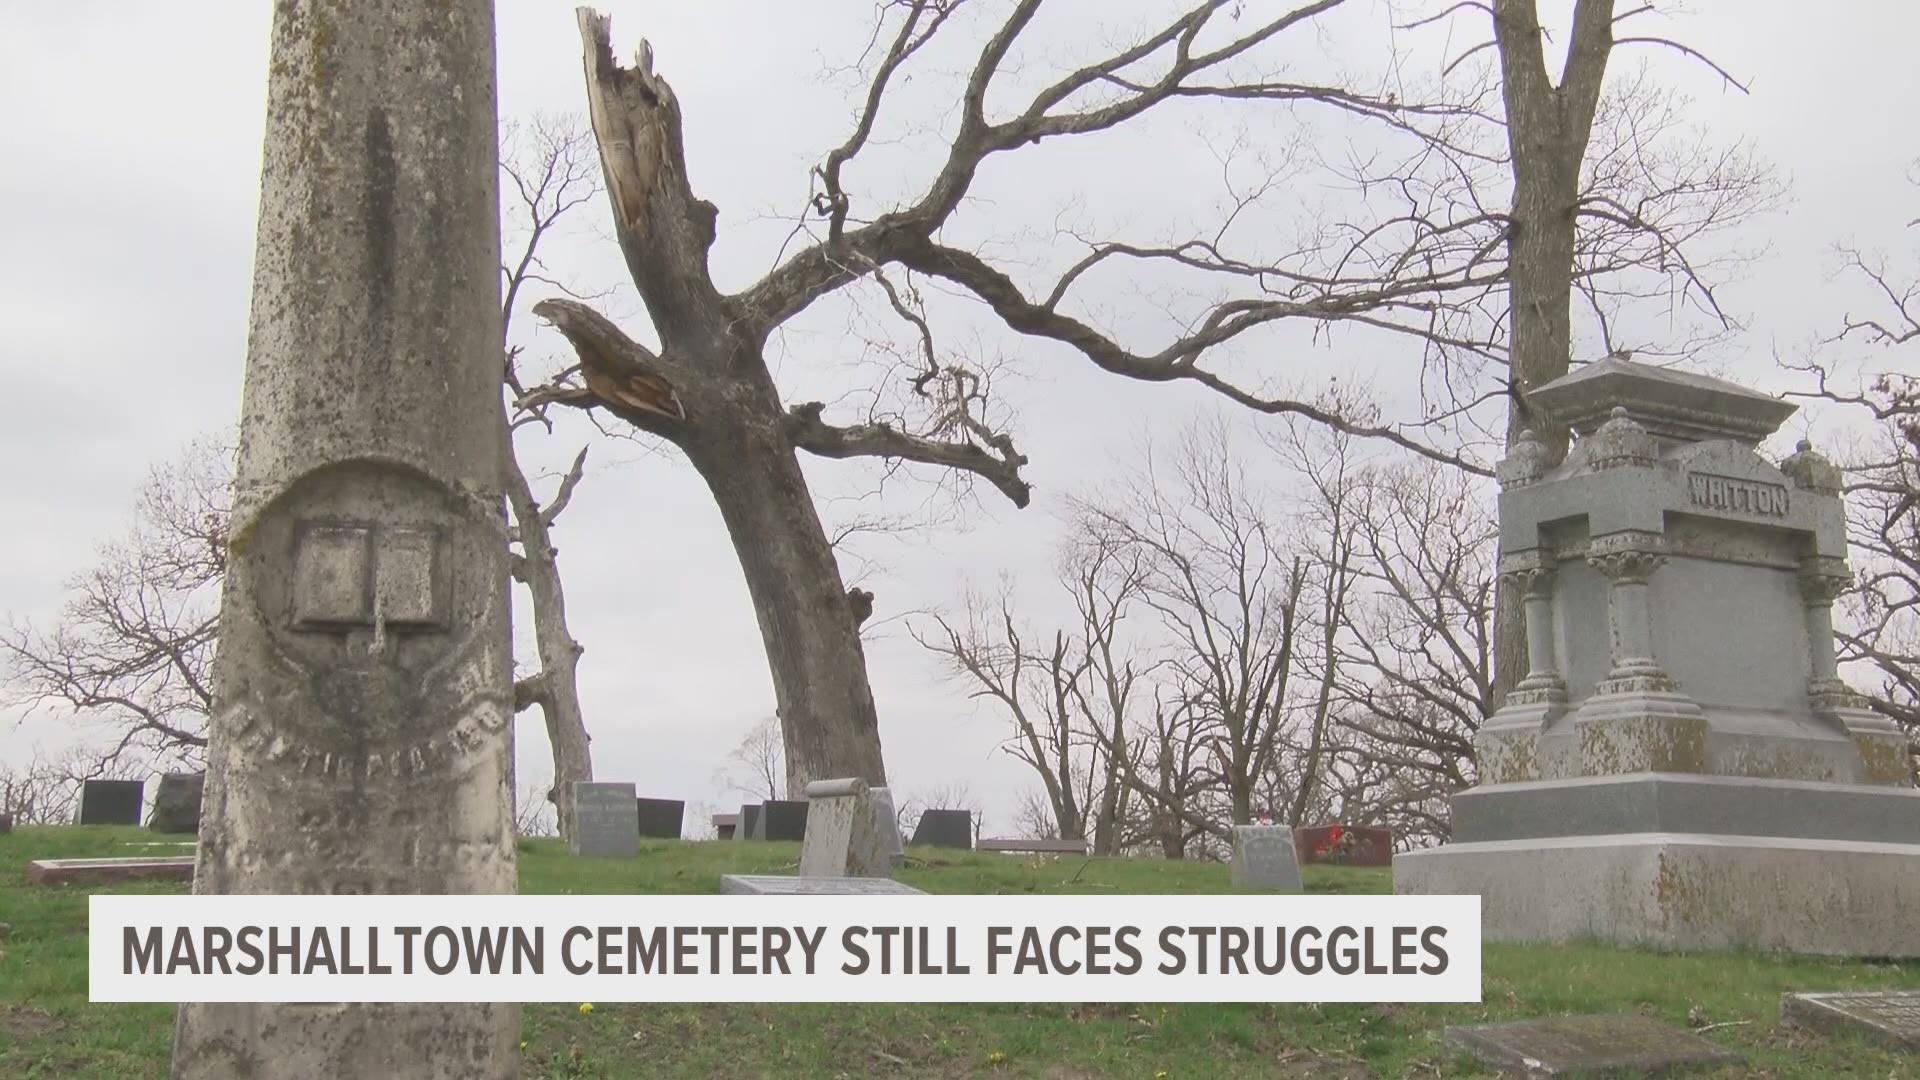 Riverside Cemetery applied for federal relief money and was approved, but a couple of months later they got denied.